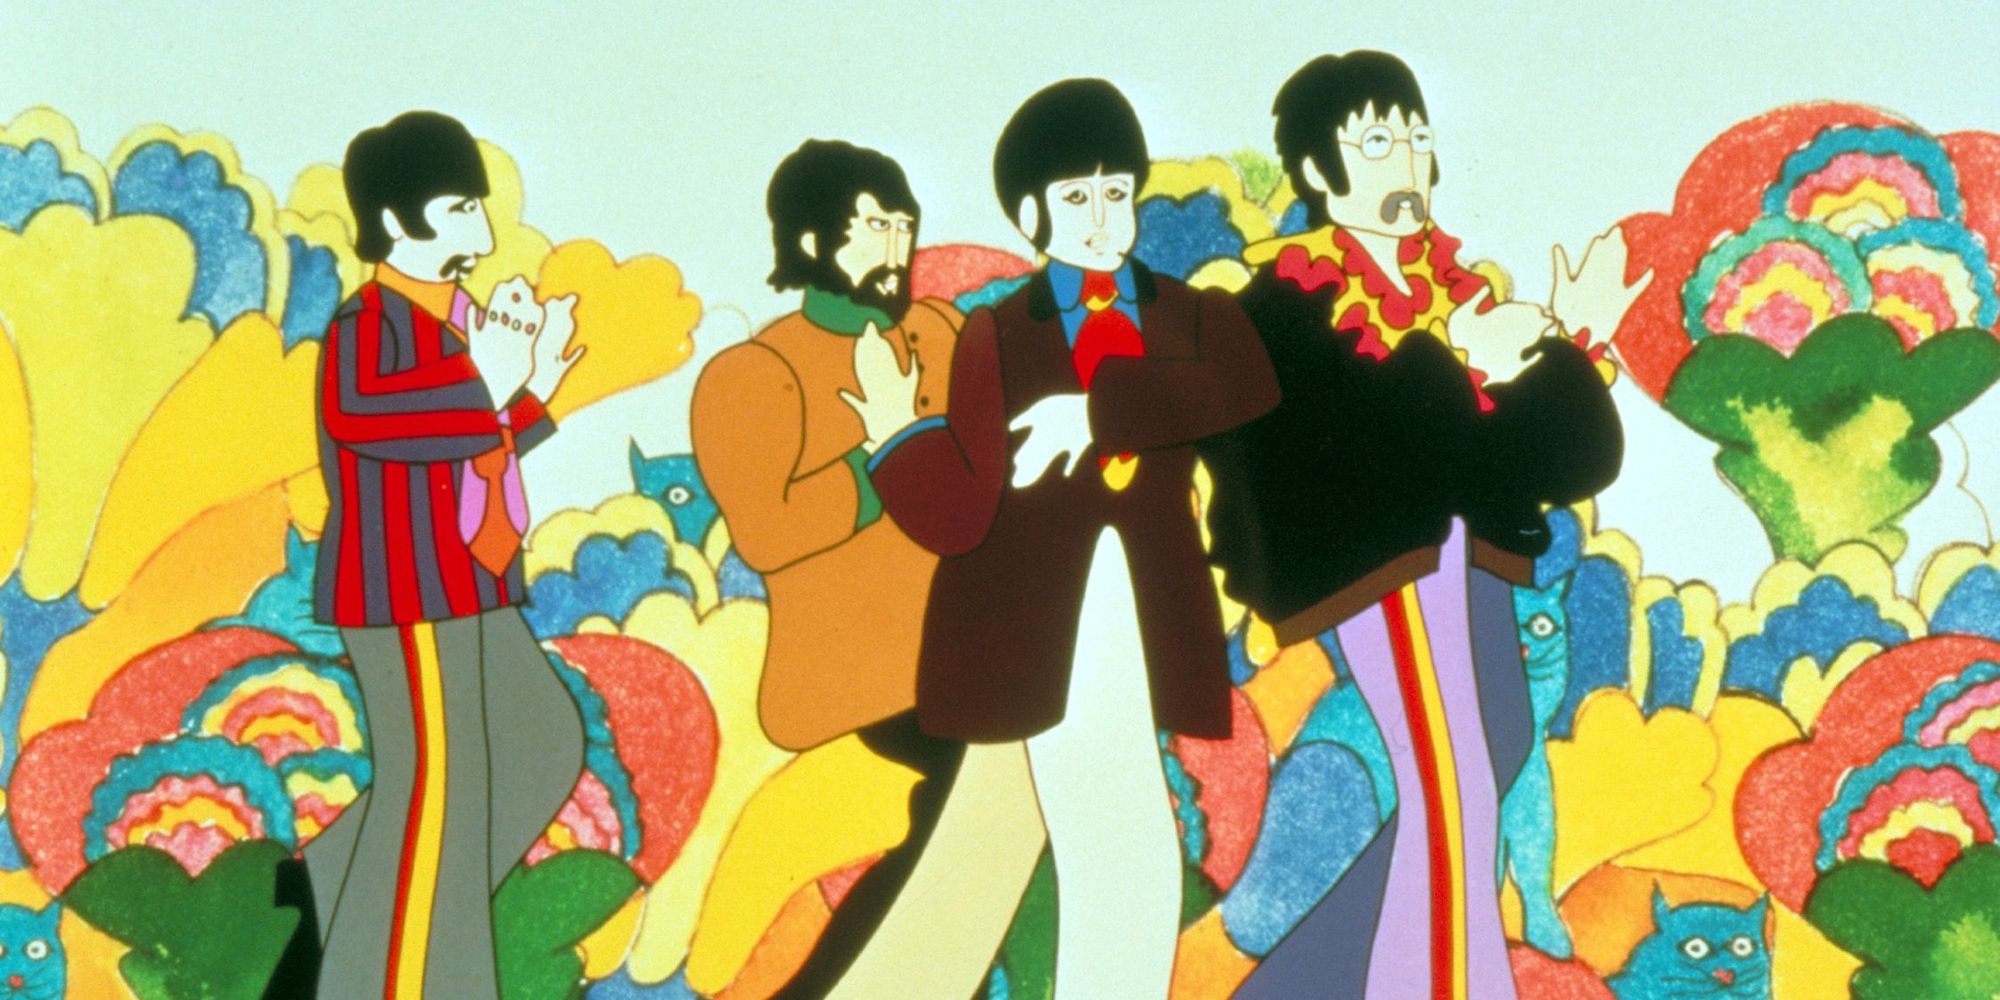 A still from the 1968 animated movie Yellow Submarine.